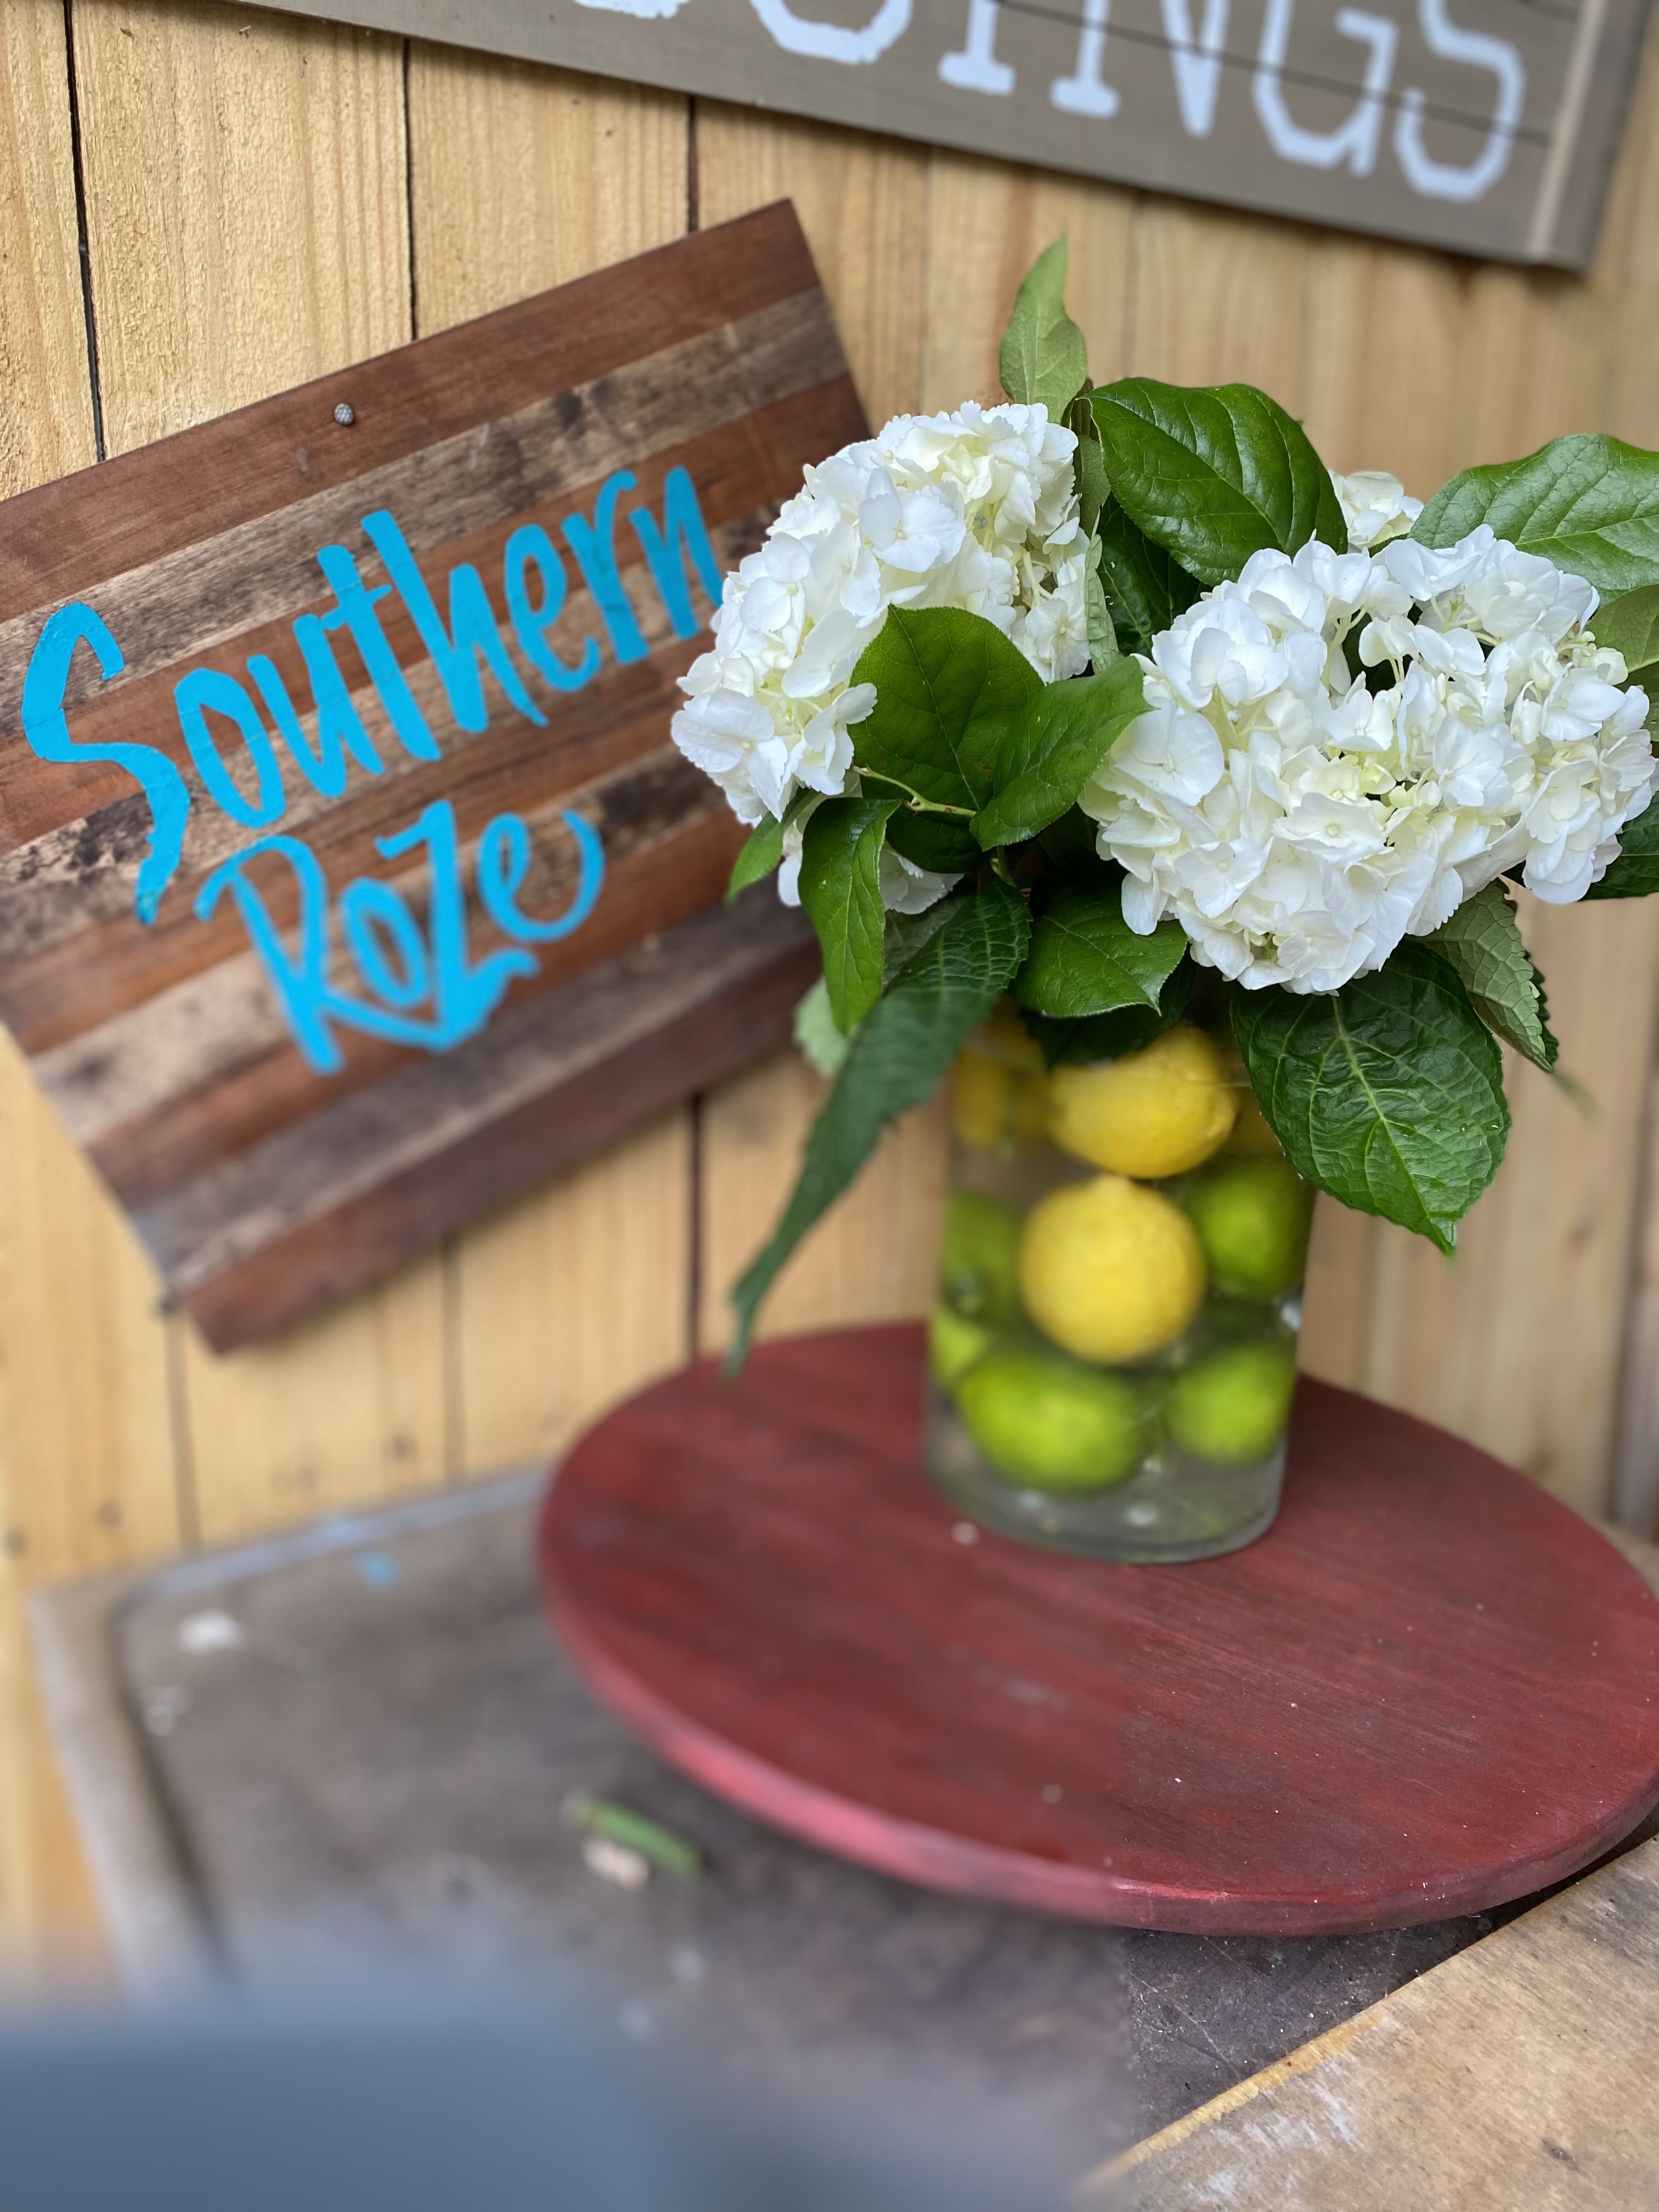 Twisted Pop! - Twisted Pop is an adorable arrangement with lemons &amp; limes incorporated with Beautiful Hydrangeas!  What an awesome Florida arrangement!